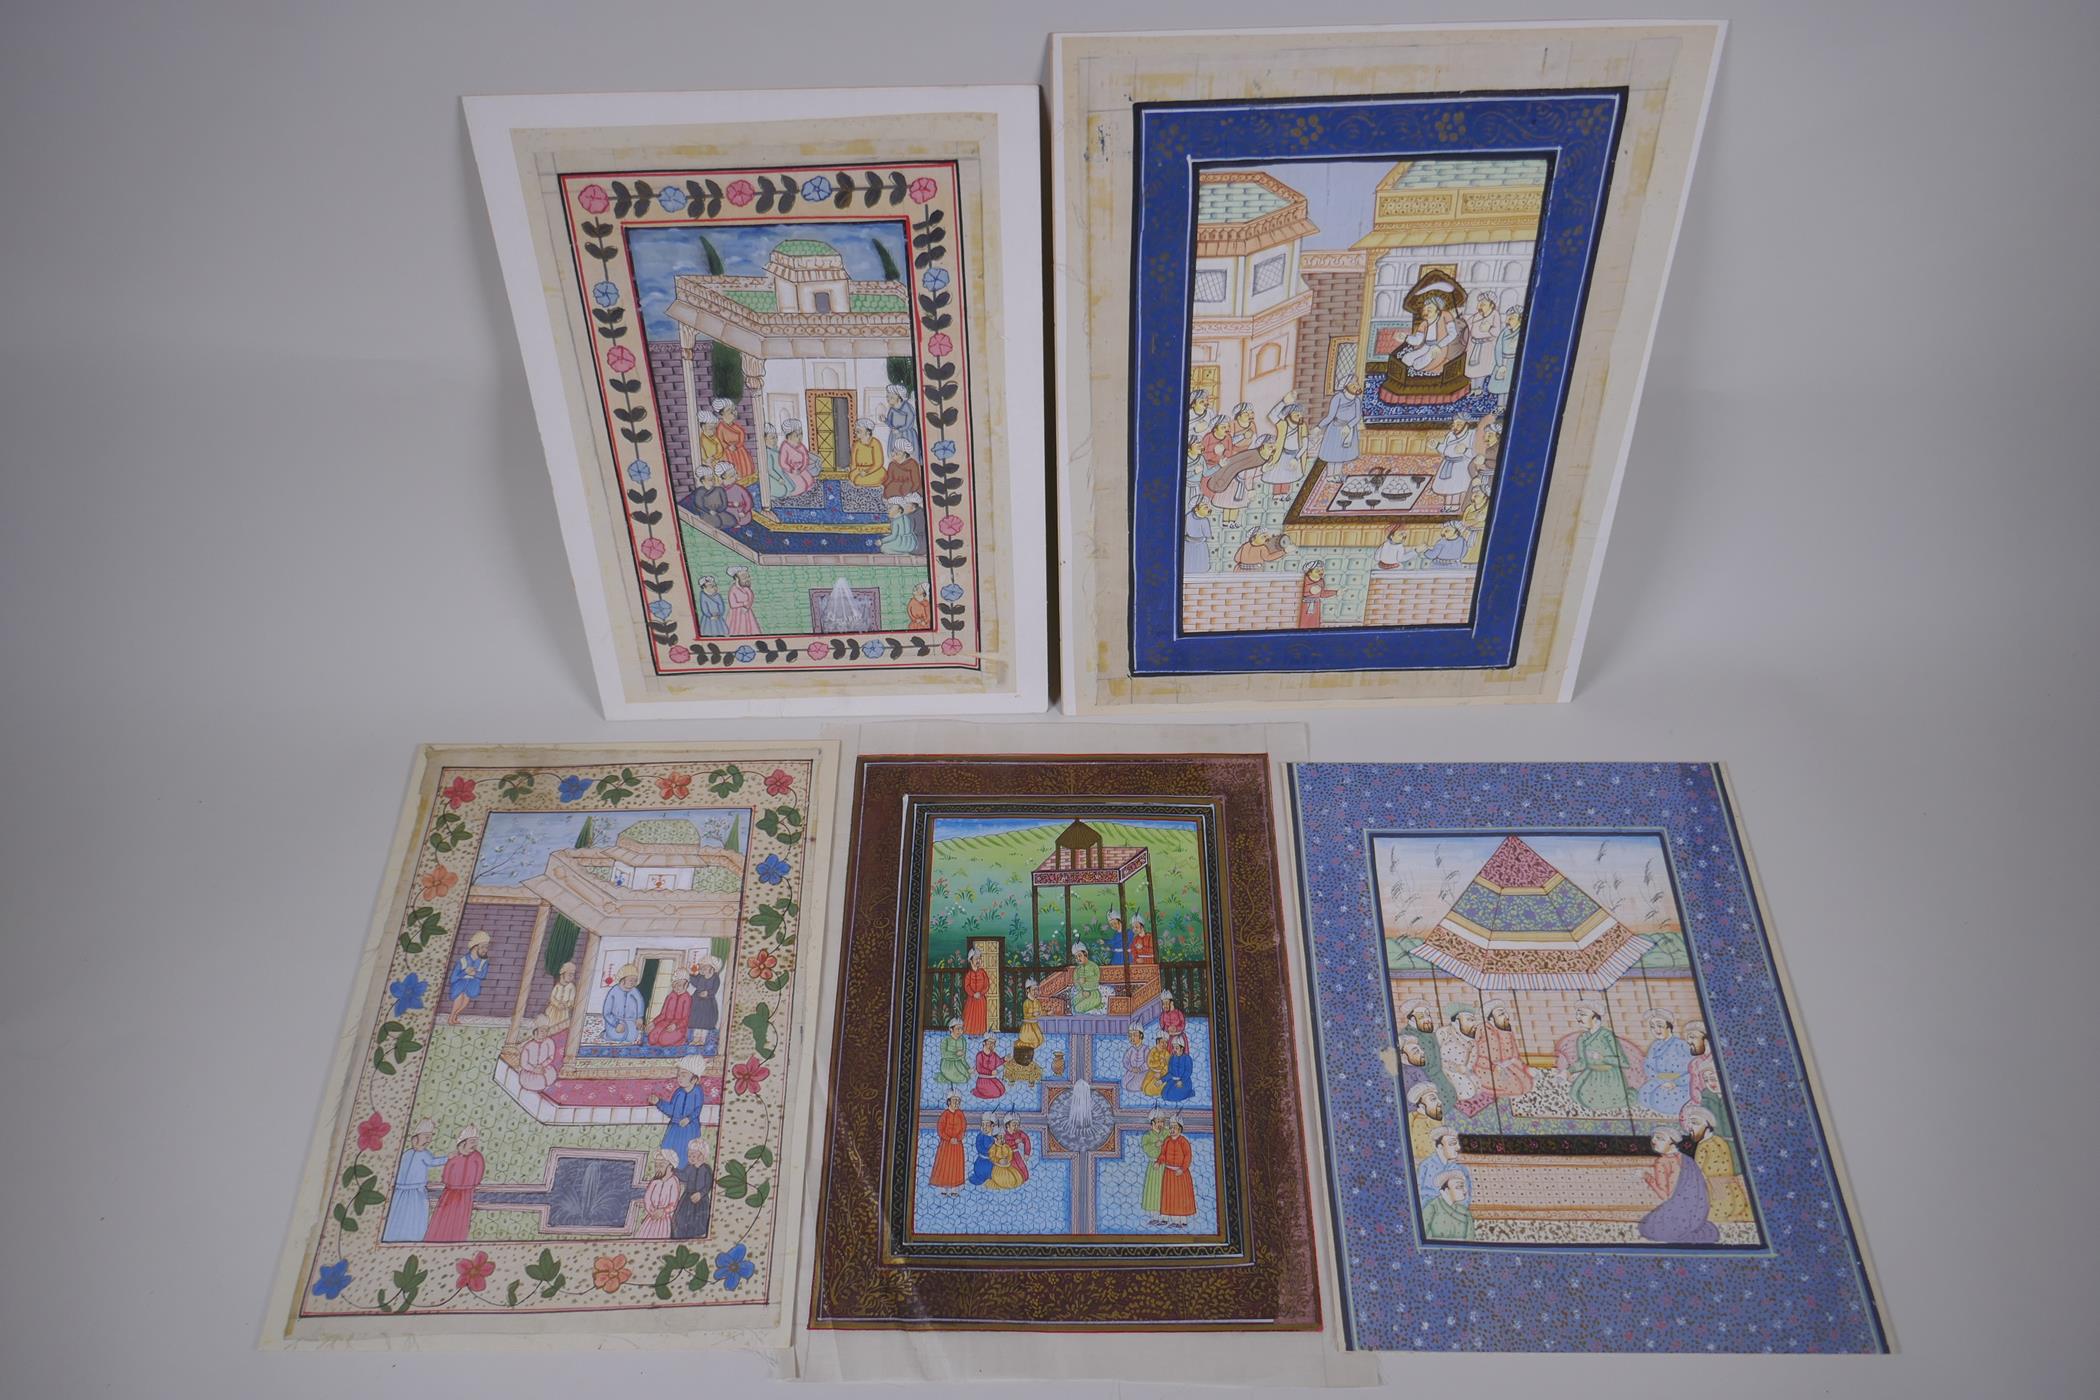 Five Indian miniature paintings on silk depicting court scenes, largest 24 x 31cm